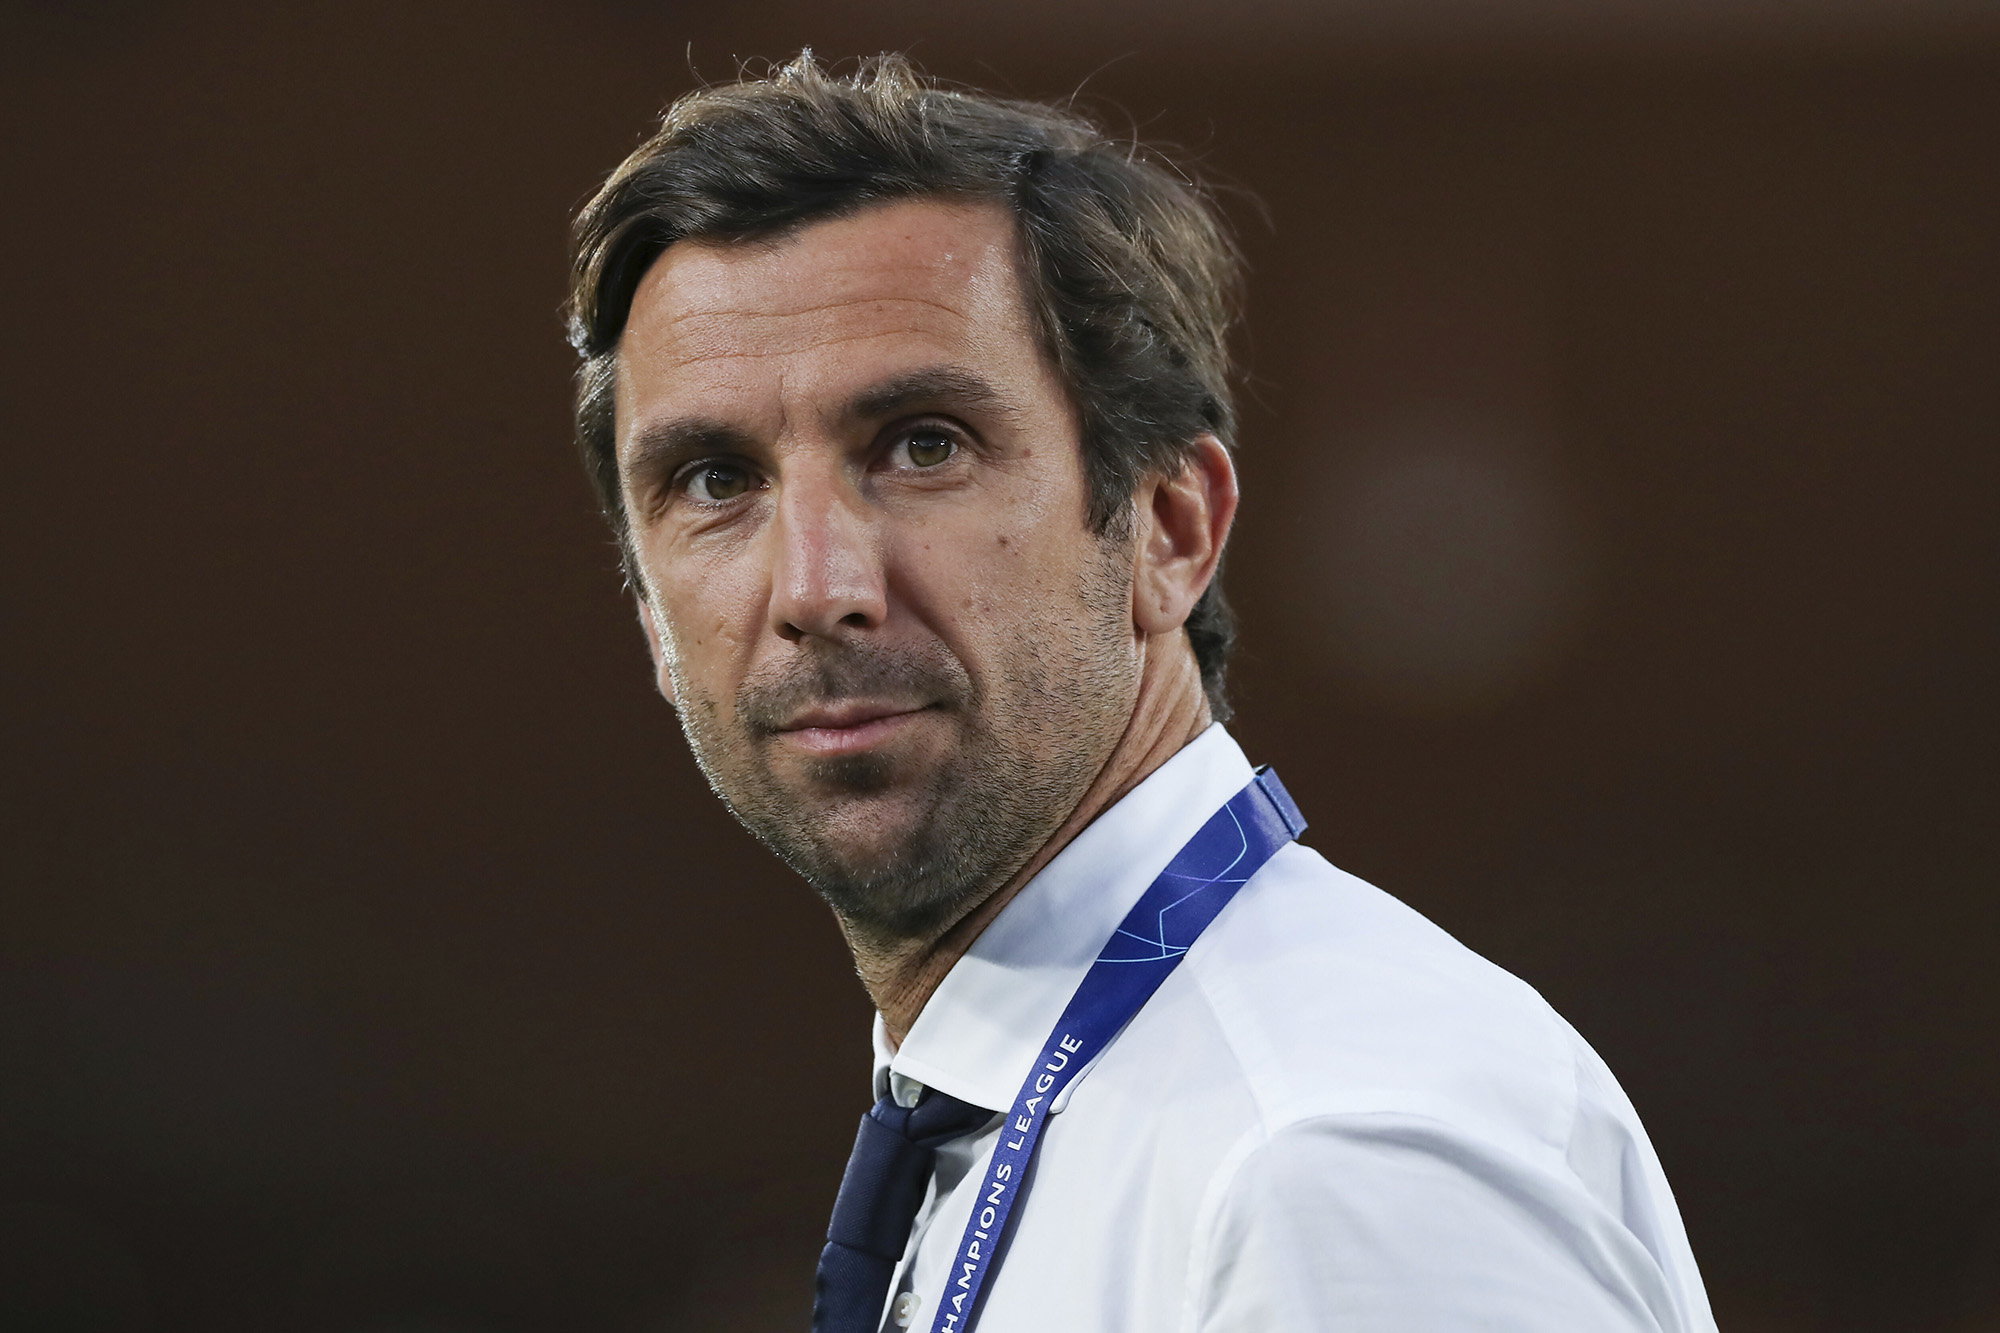 Darijo Srna the Shakhtar Donetsk Director of Sport during the UEFA Champions League match at Stade Louis II, Monaco, on August 17.